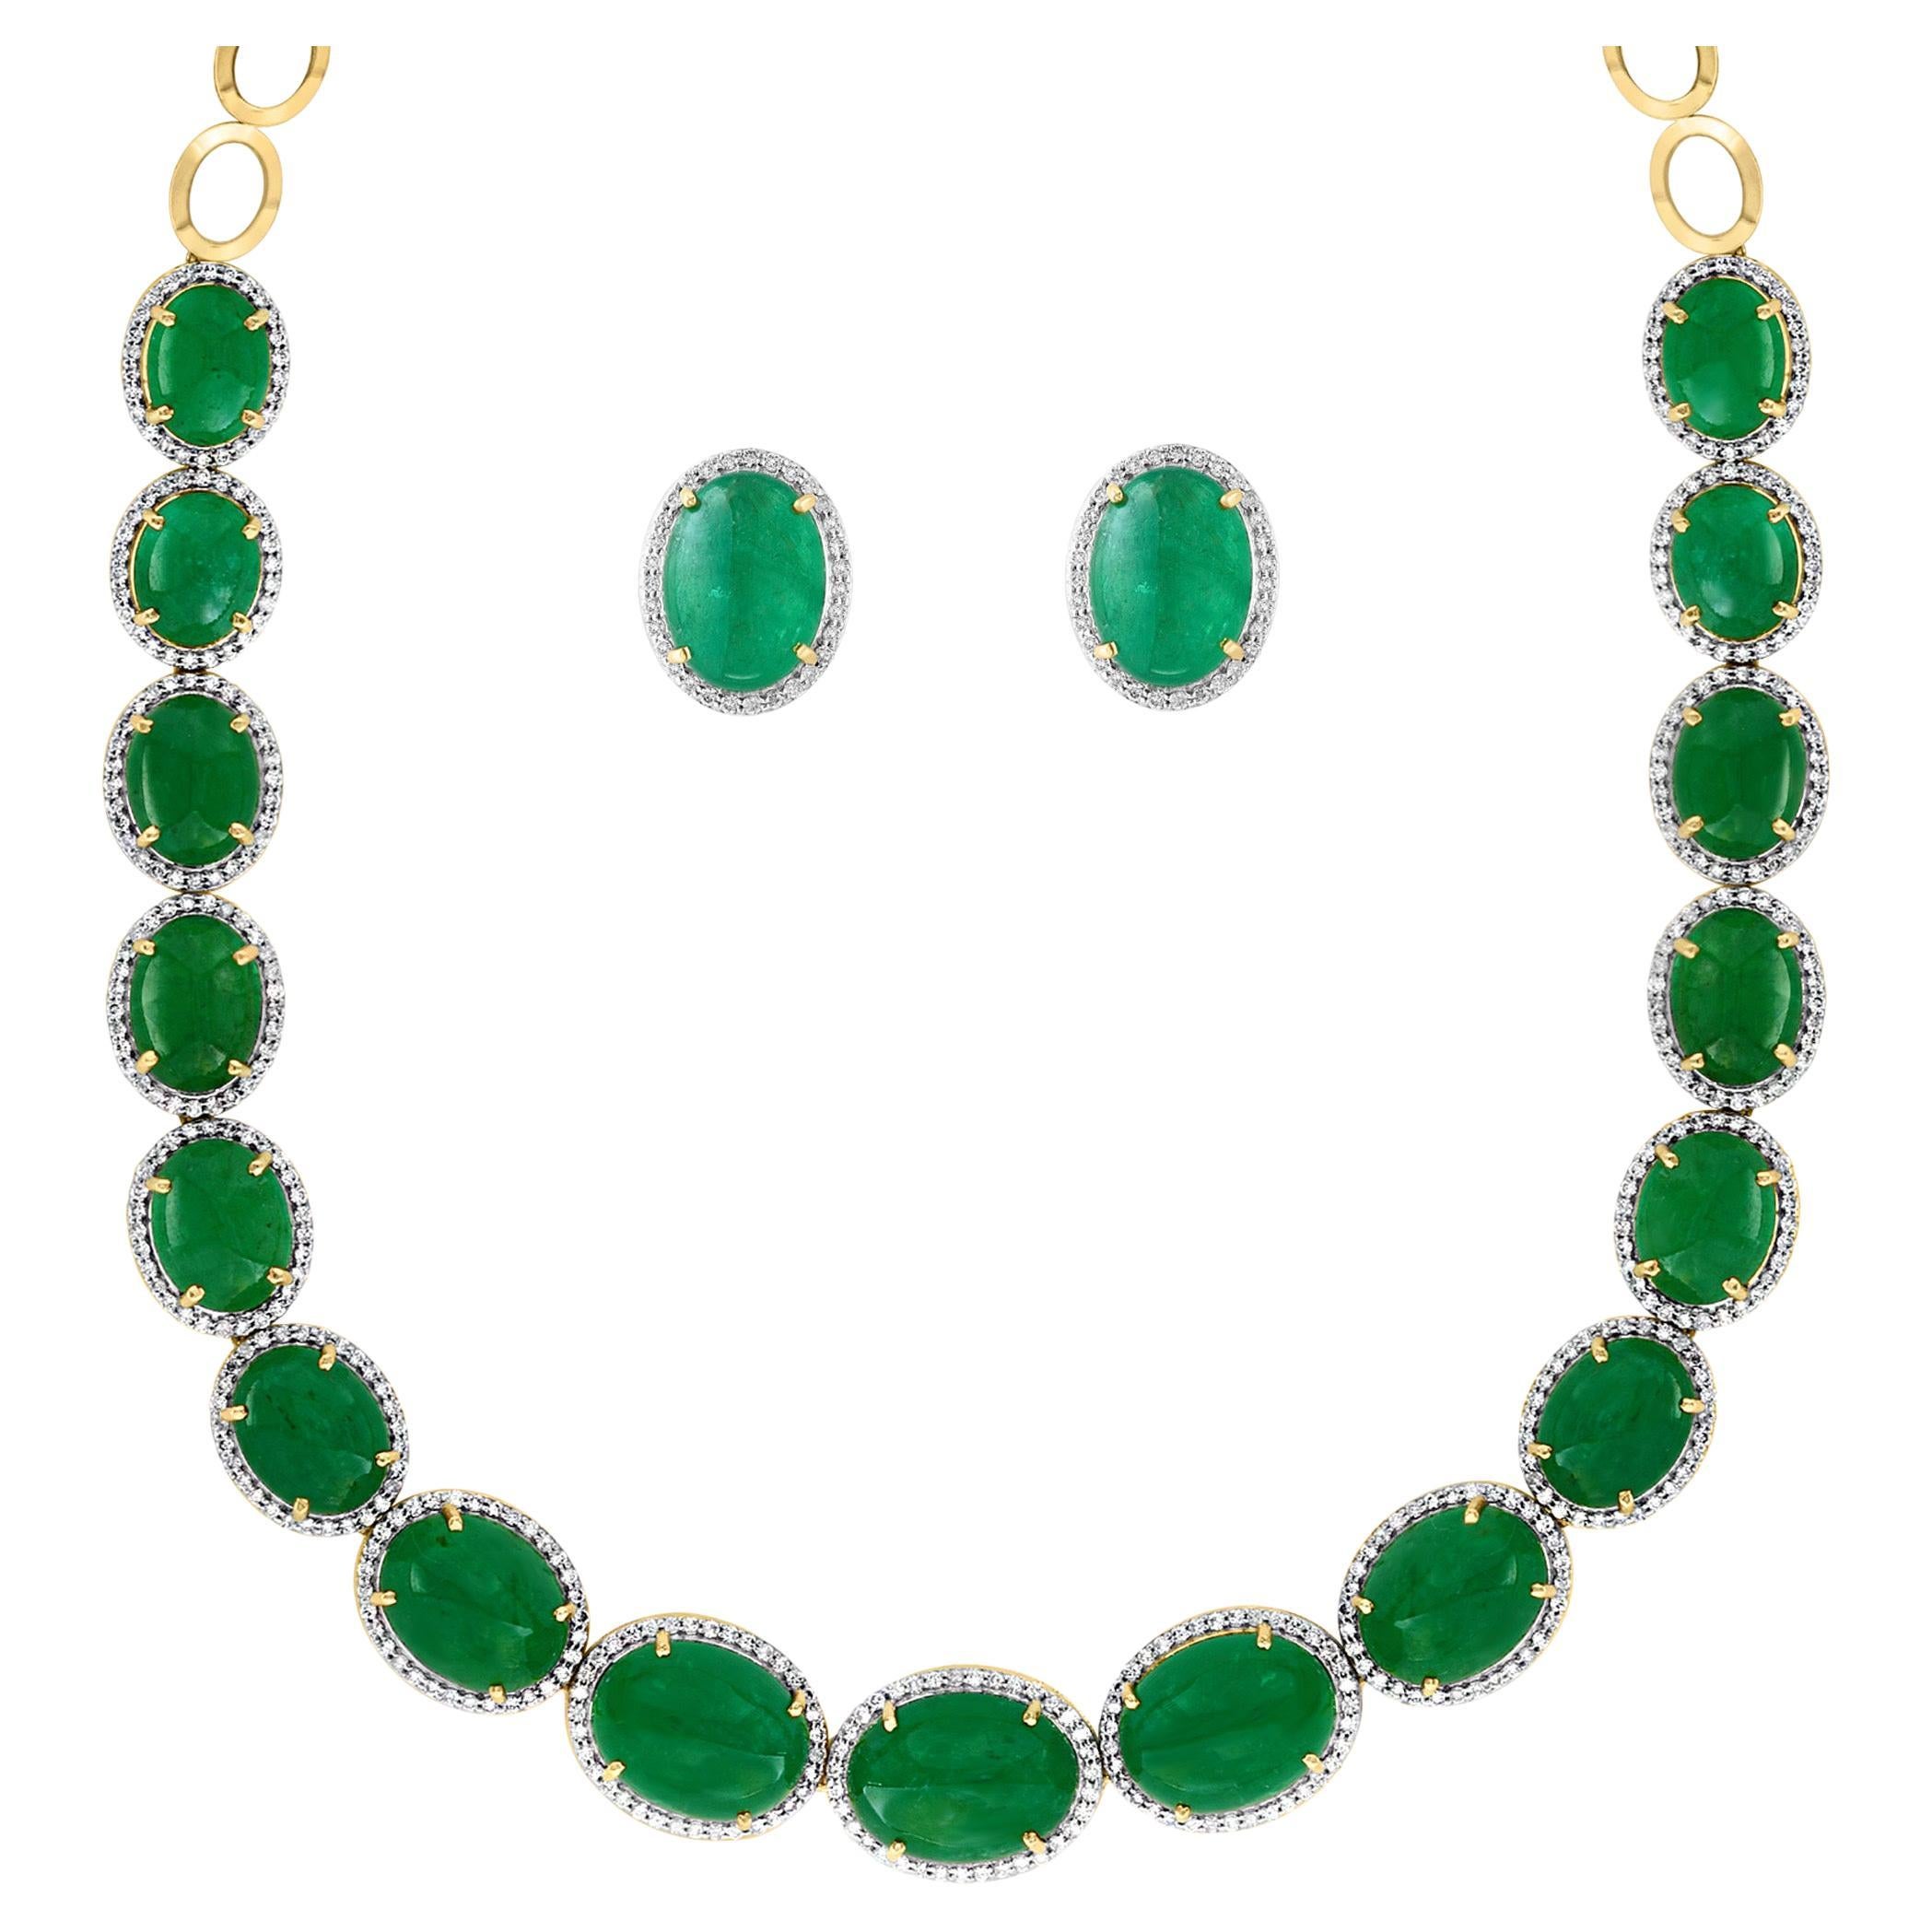 110 Ct Oval Natural Cabochon Emerald & Diamond Necklace, Earring Suite 14 K Gold